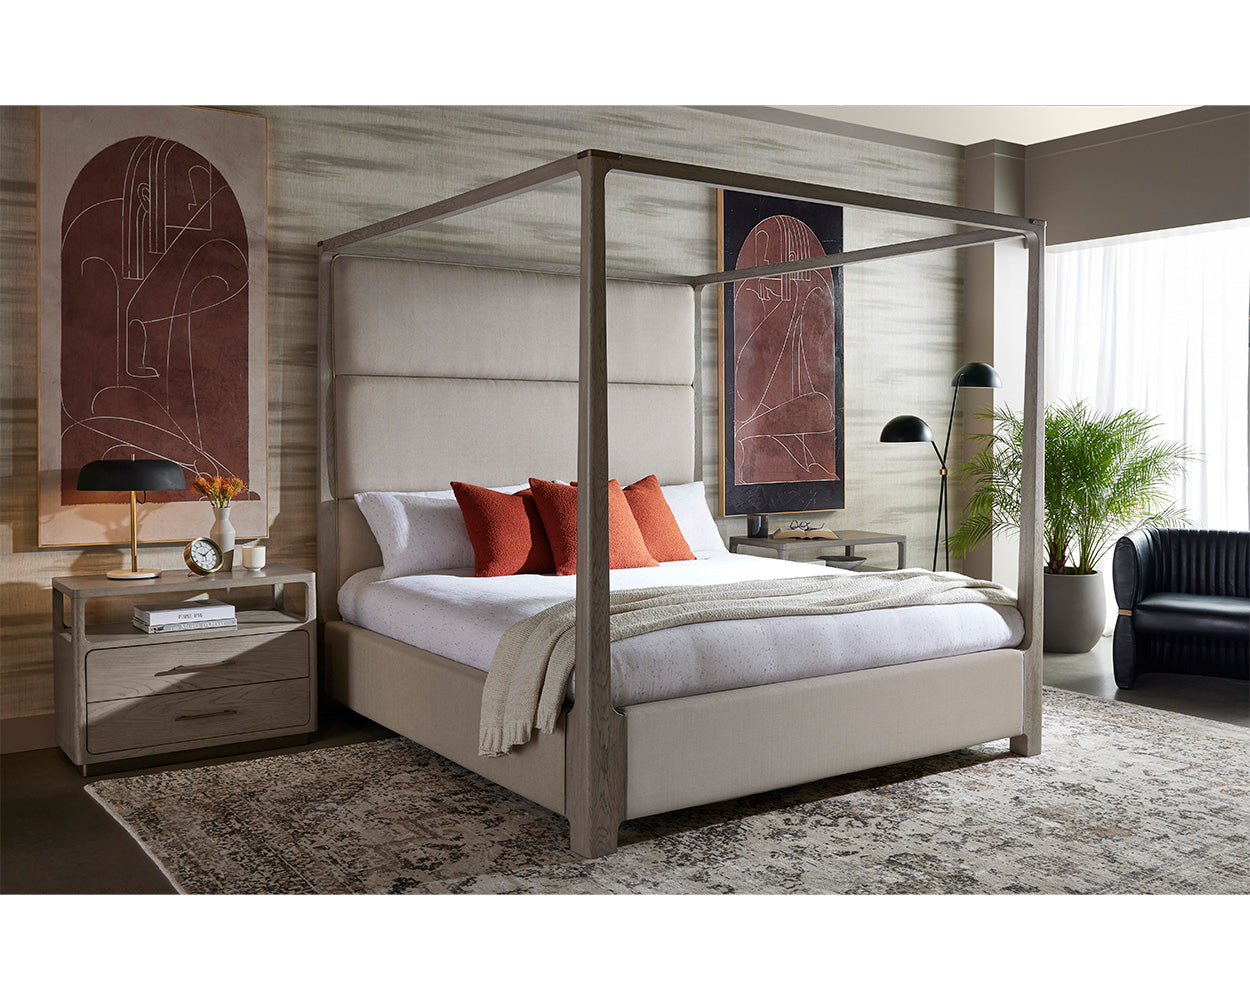 Danette Canopy Bed